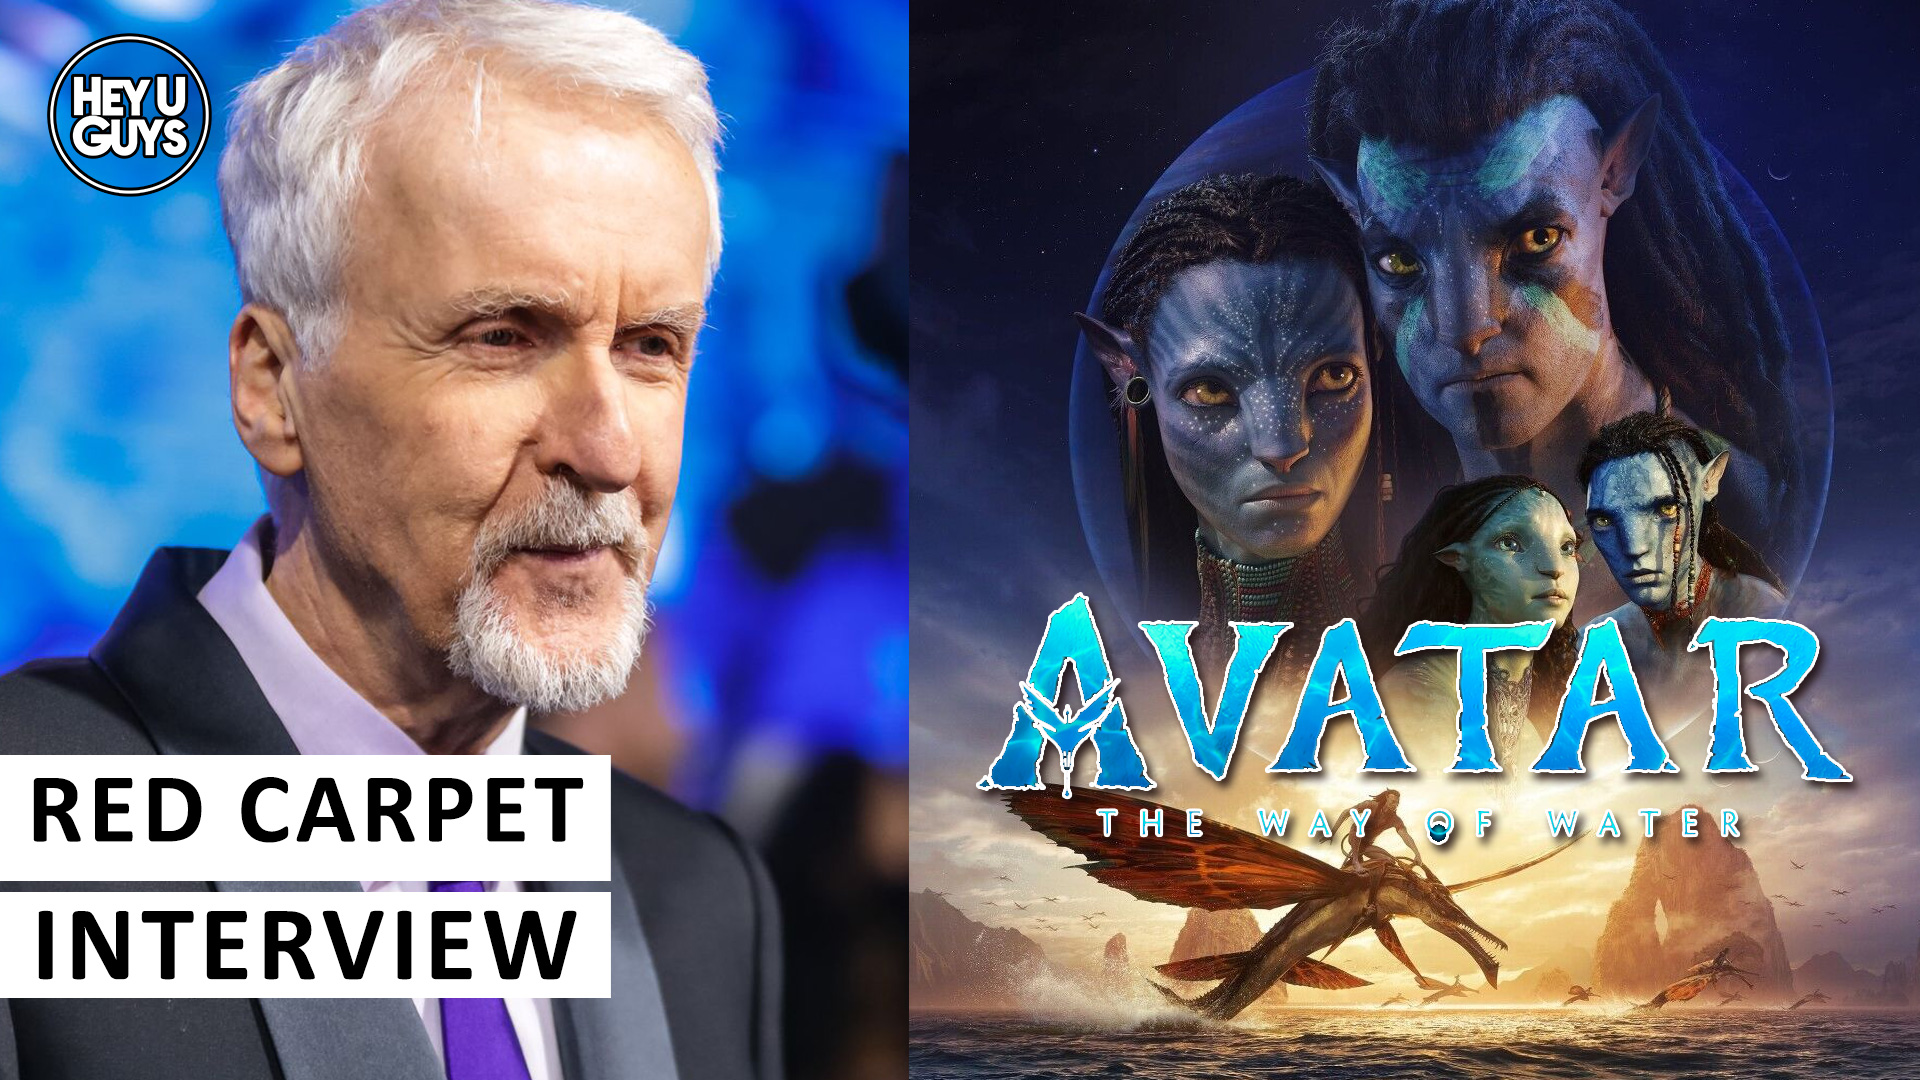 James-Cameron-Avatar-The-Way-of-Water-World-Premiere